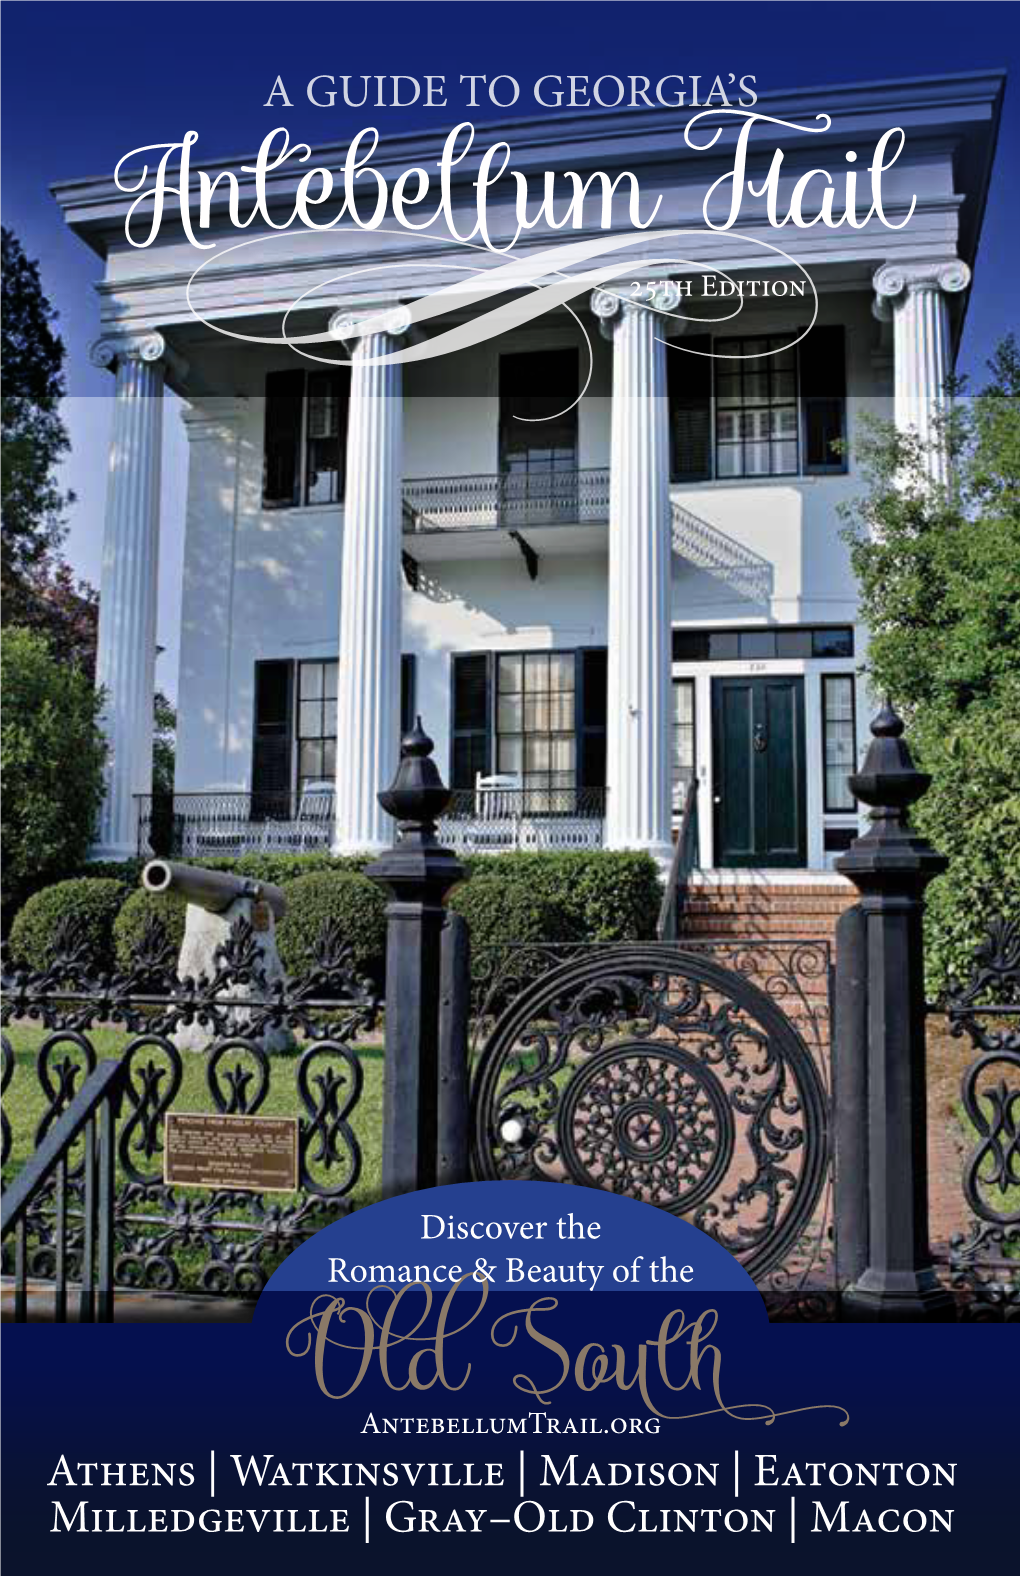 Antebellum Trail Calendar—Macon More Information Call the Downtown Visitor Center at 478.743.3401